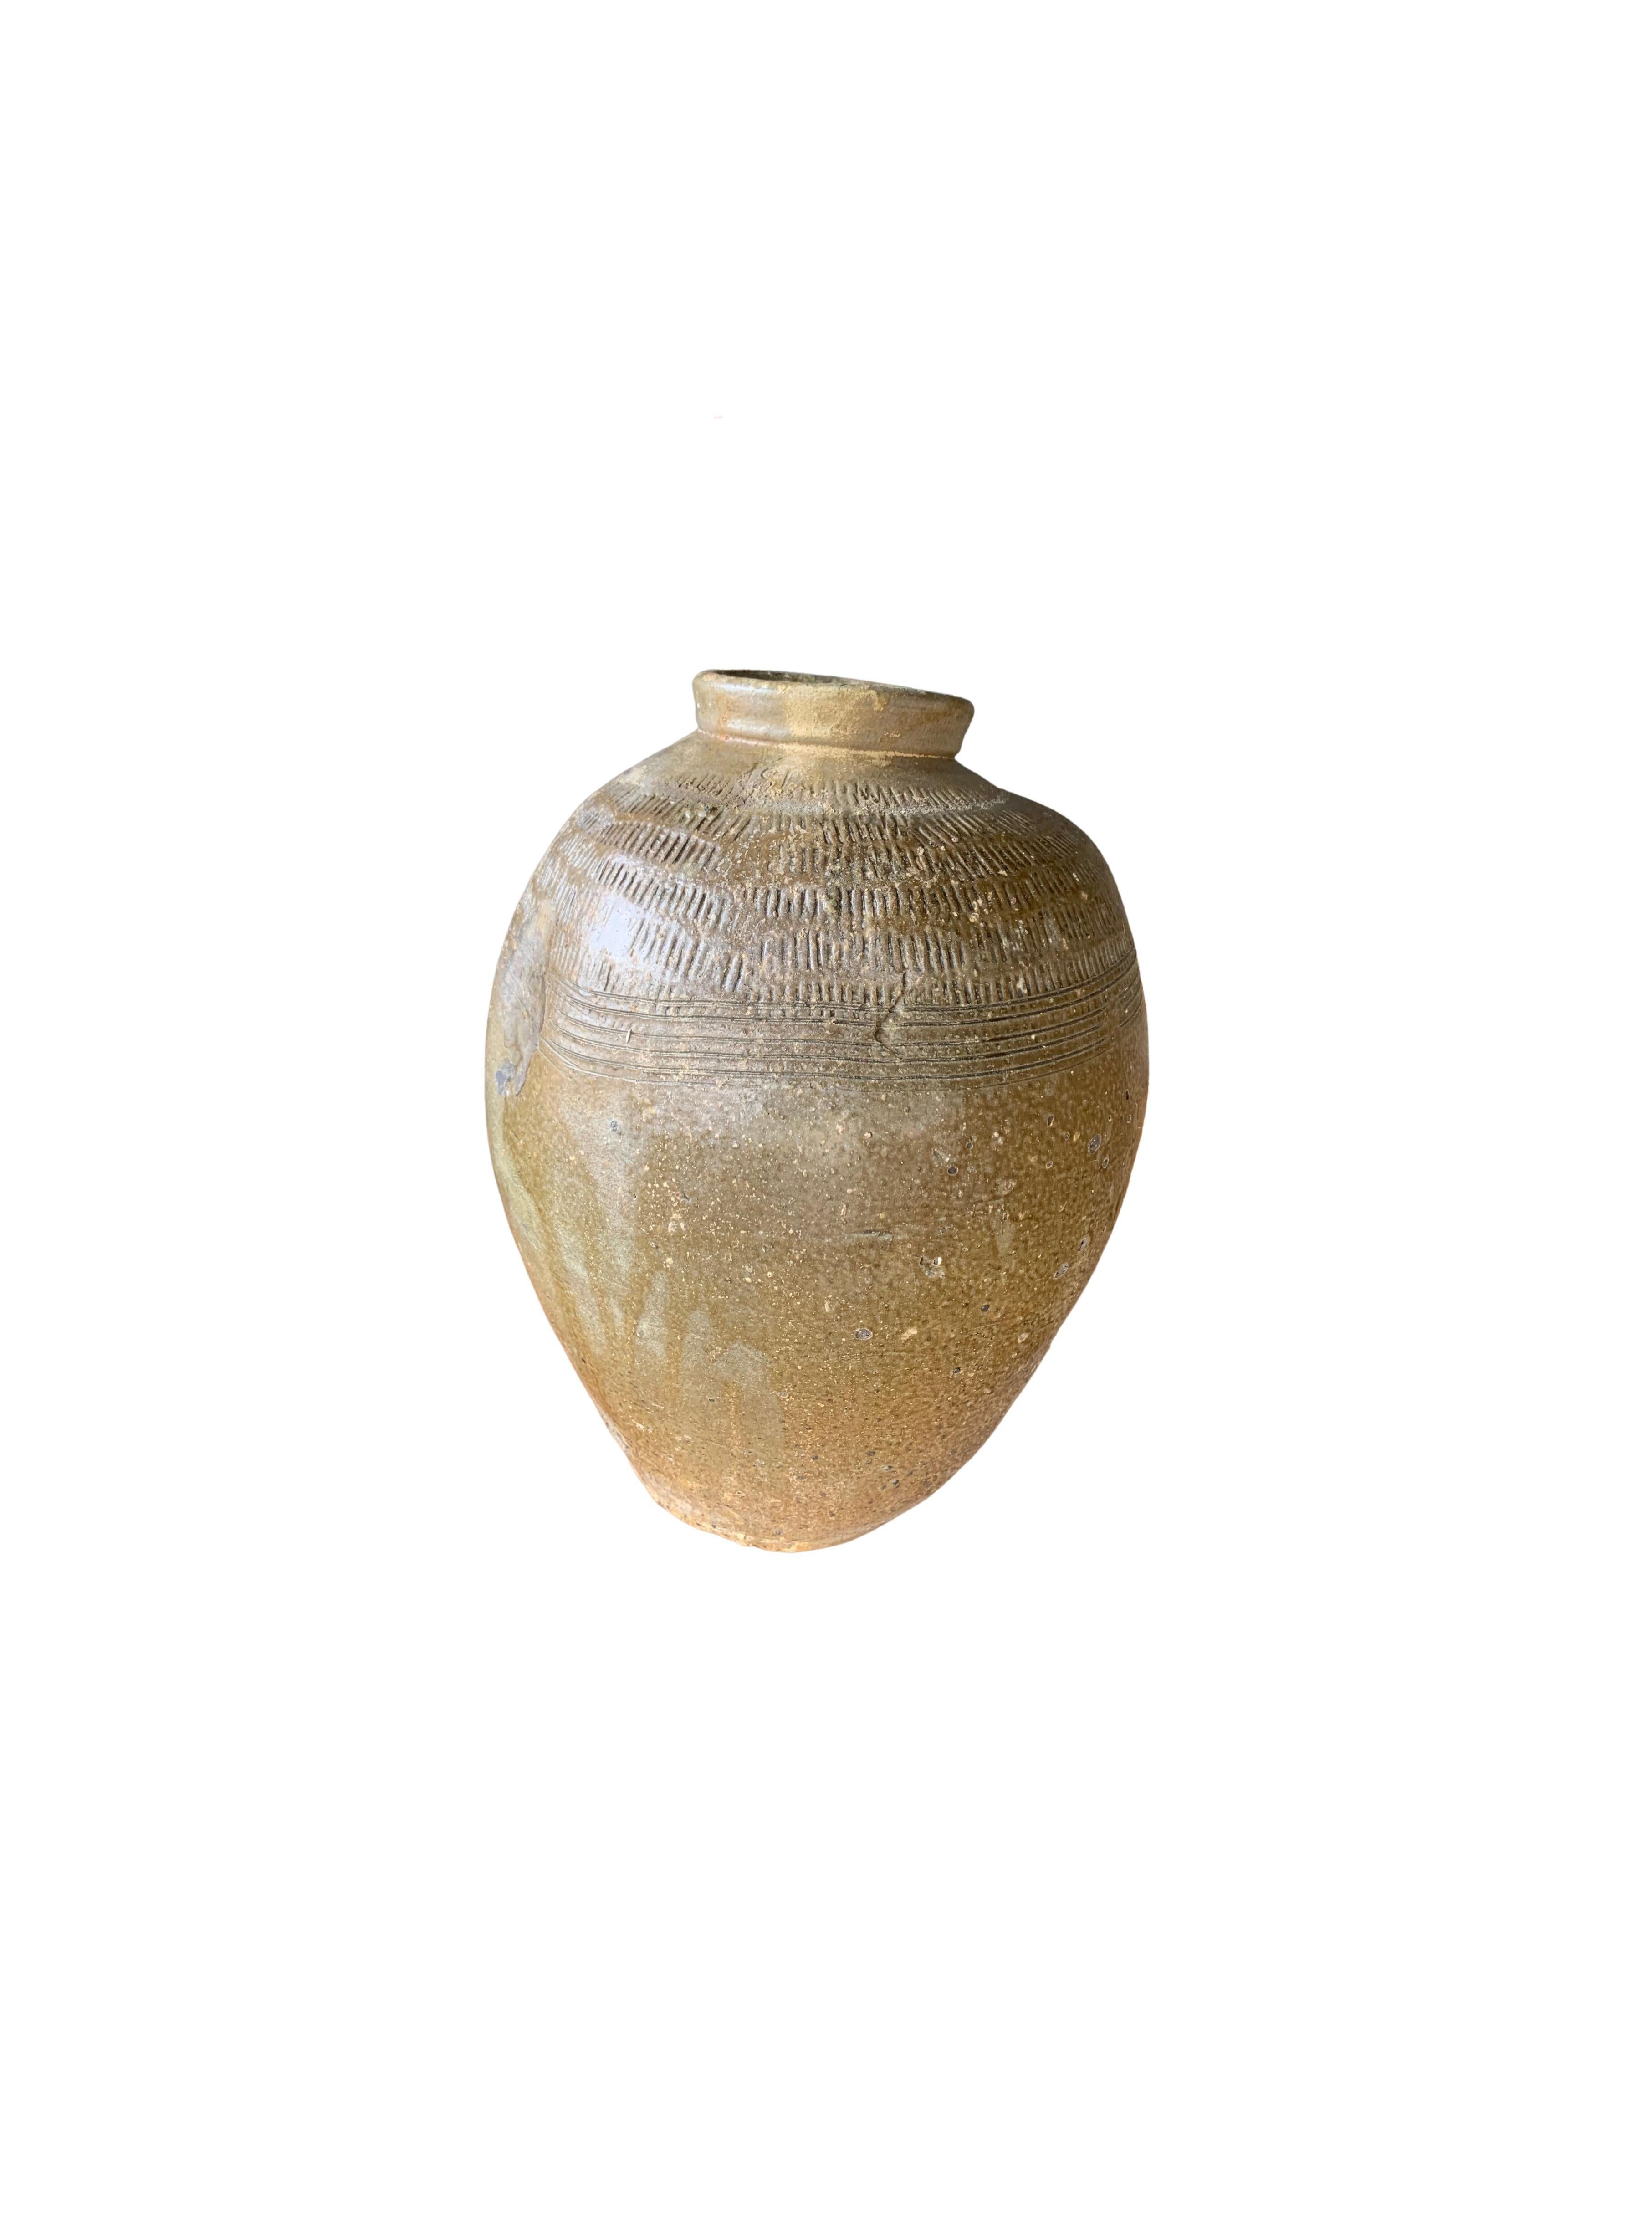 This glazed Chinese ceramic jar from the turn of the 19th century was once used for pickling foods. It features a jade green finish and outer surface that features a ribbed texture. This pot has a bent and indented shape which adds to its charm.